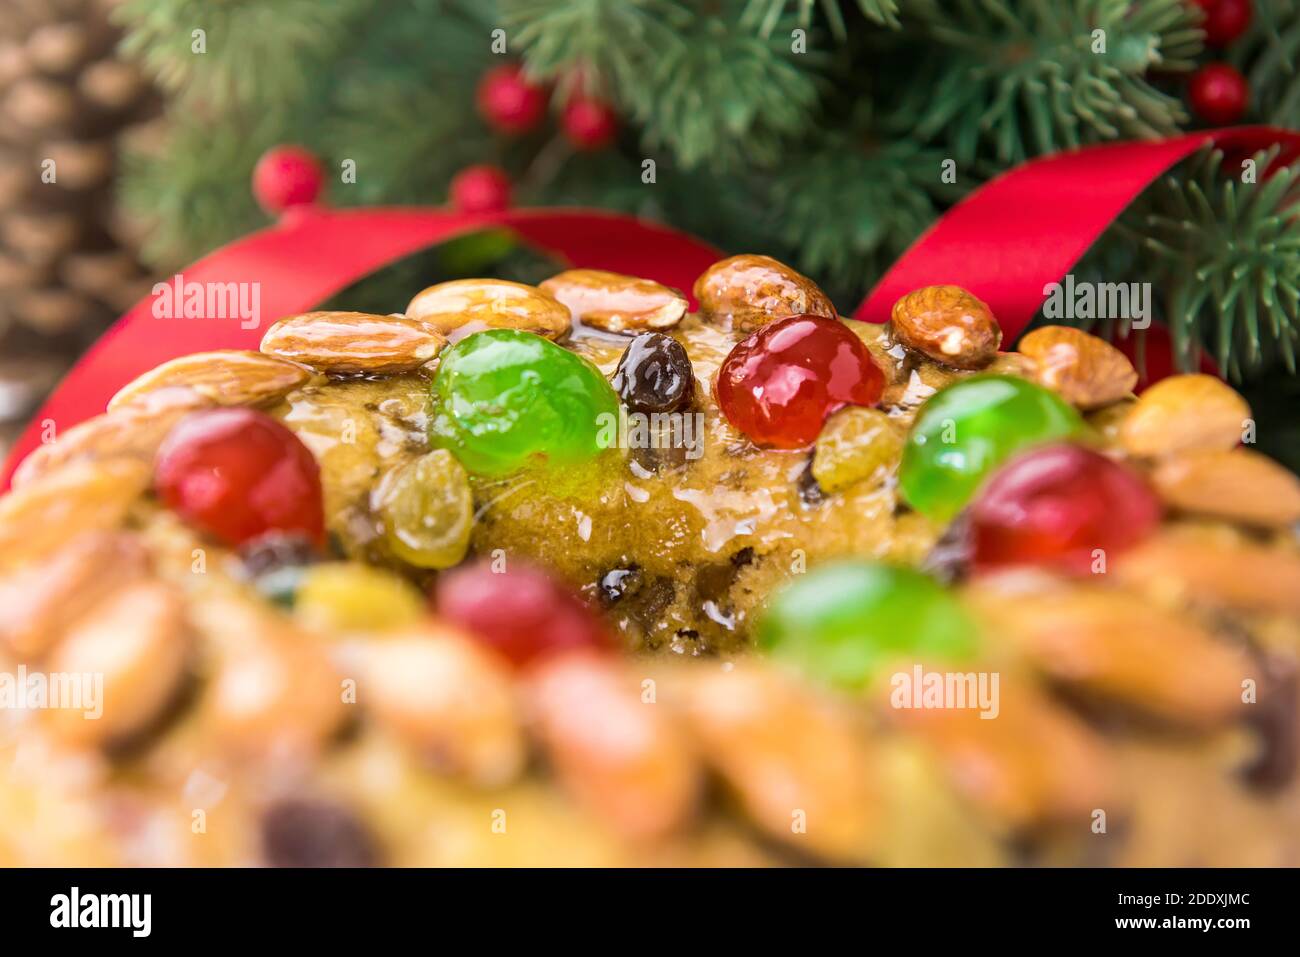 Close up of glazed round hollow colorful Christmas fruitcake with green pine needles and red ribbon decorations in background Stock Photo